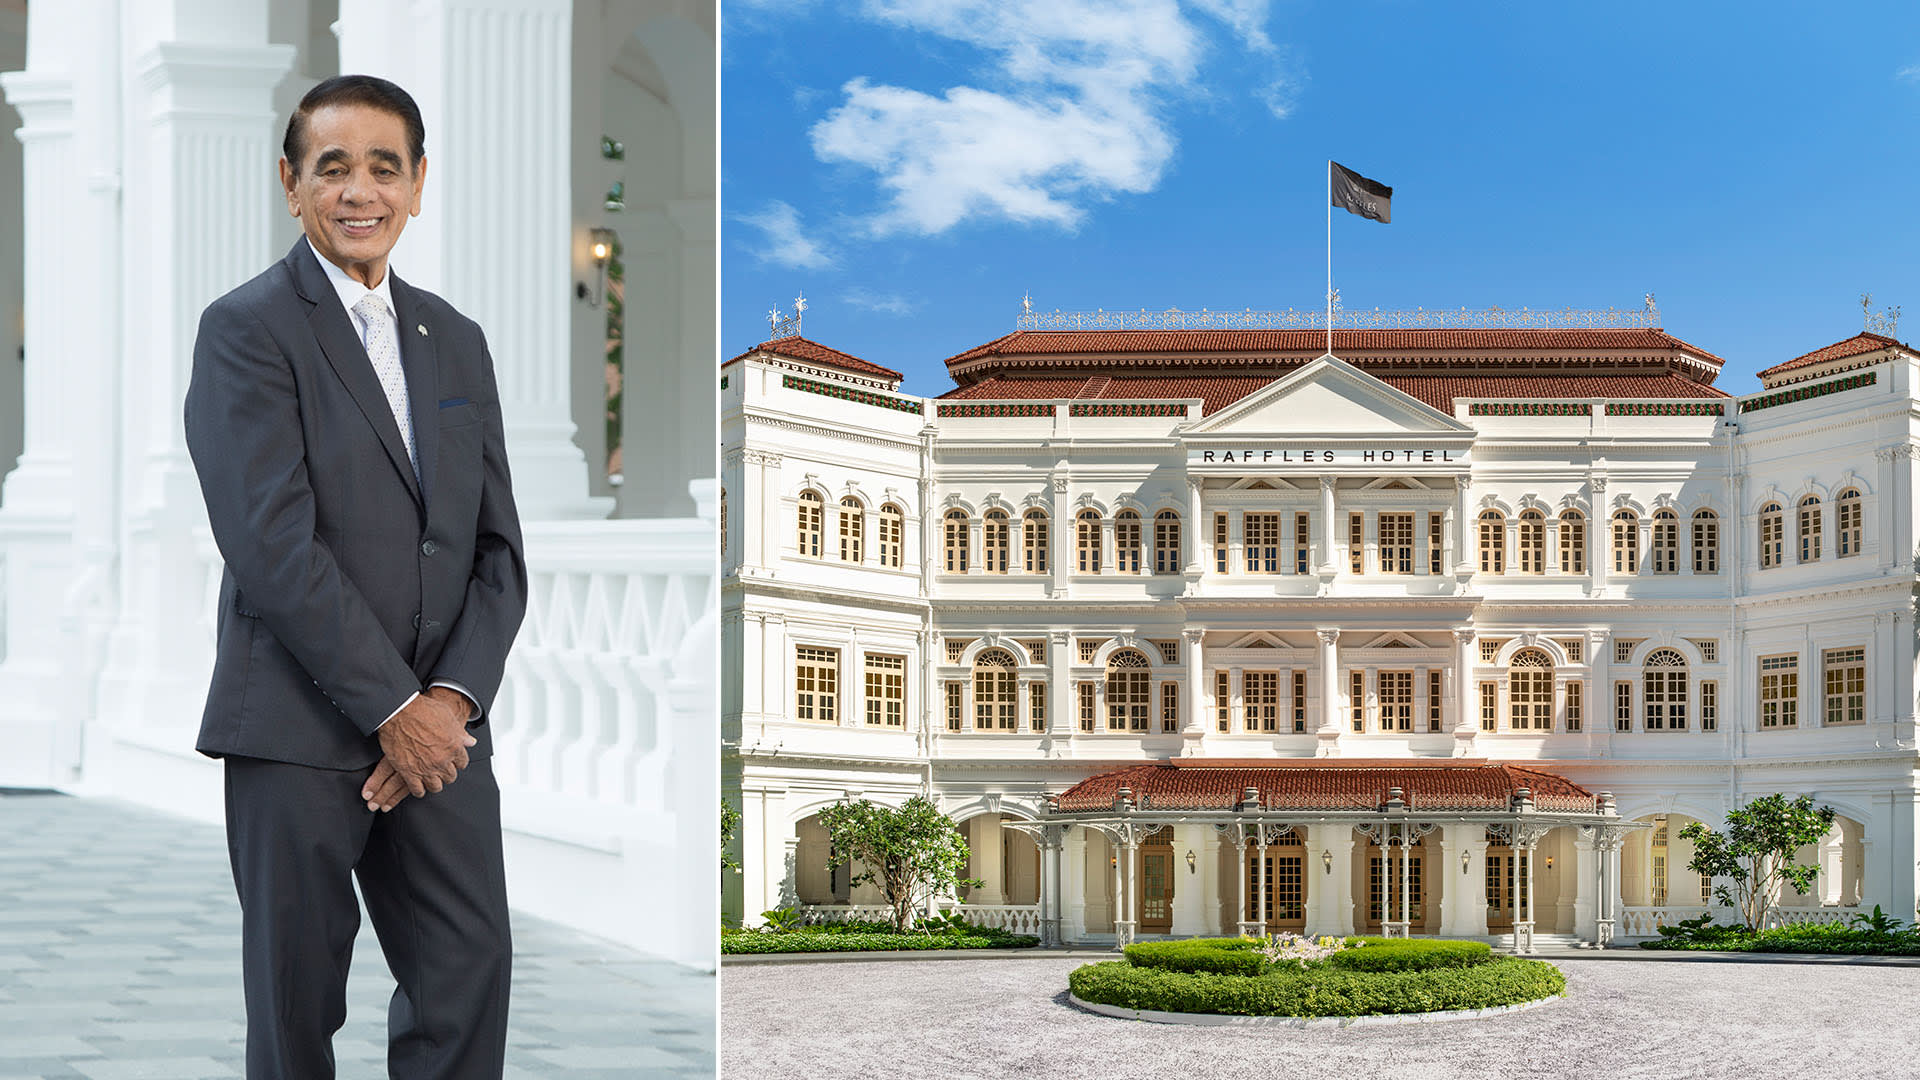 Skeletons, Royalty & Pop Stars: Secrets Of Raffles Hotel, As Told By Their Resident Historian Who's Worked Here For 48 Years